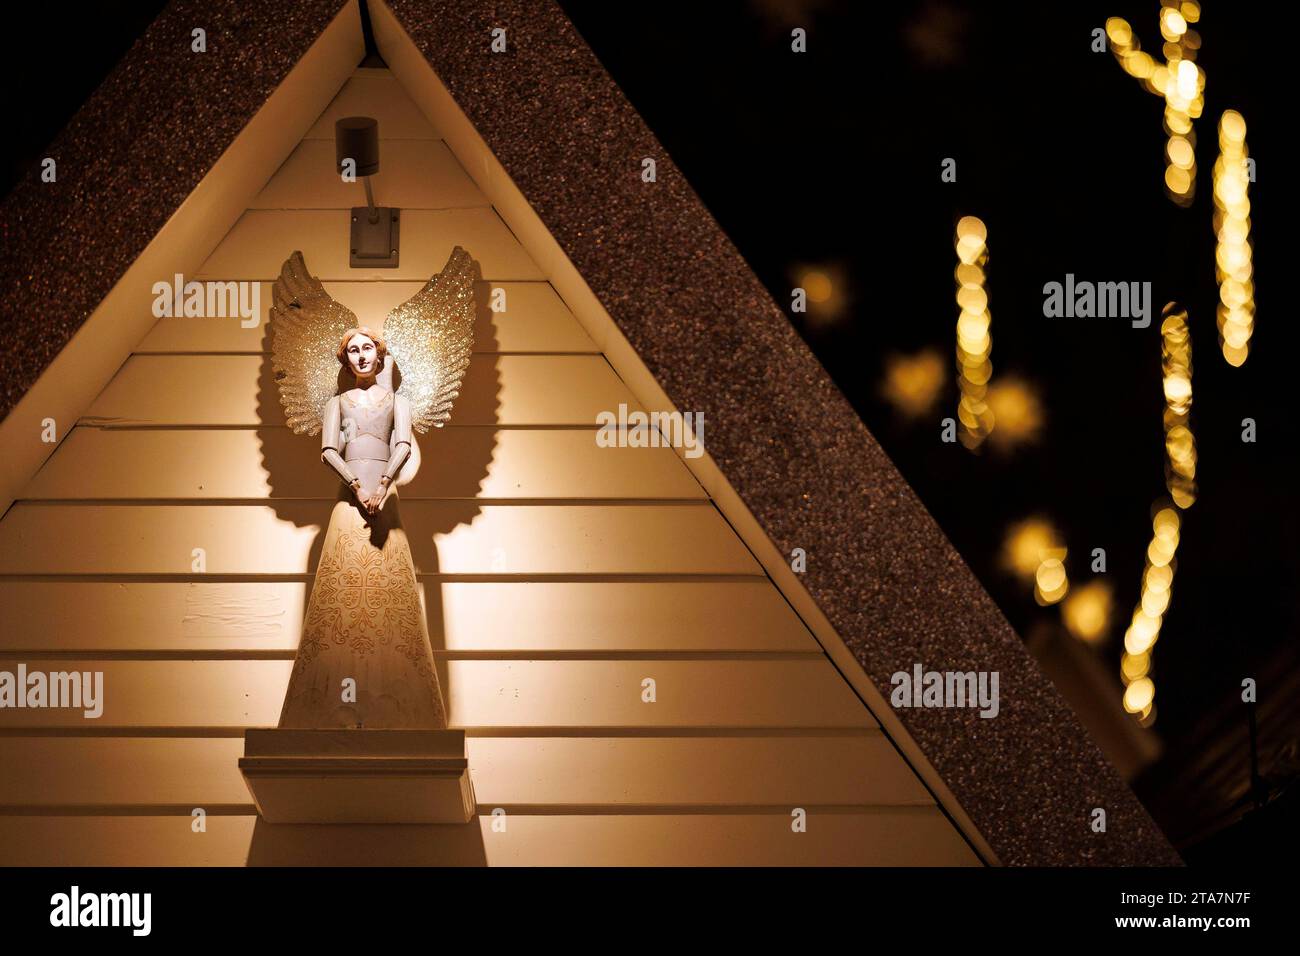 Angels christmas photography and Alamy images stock hi-res - market